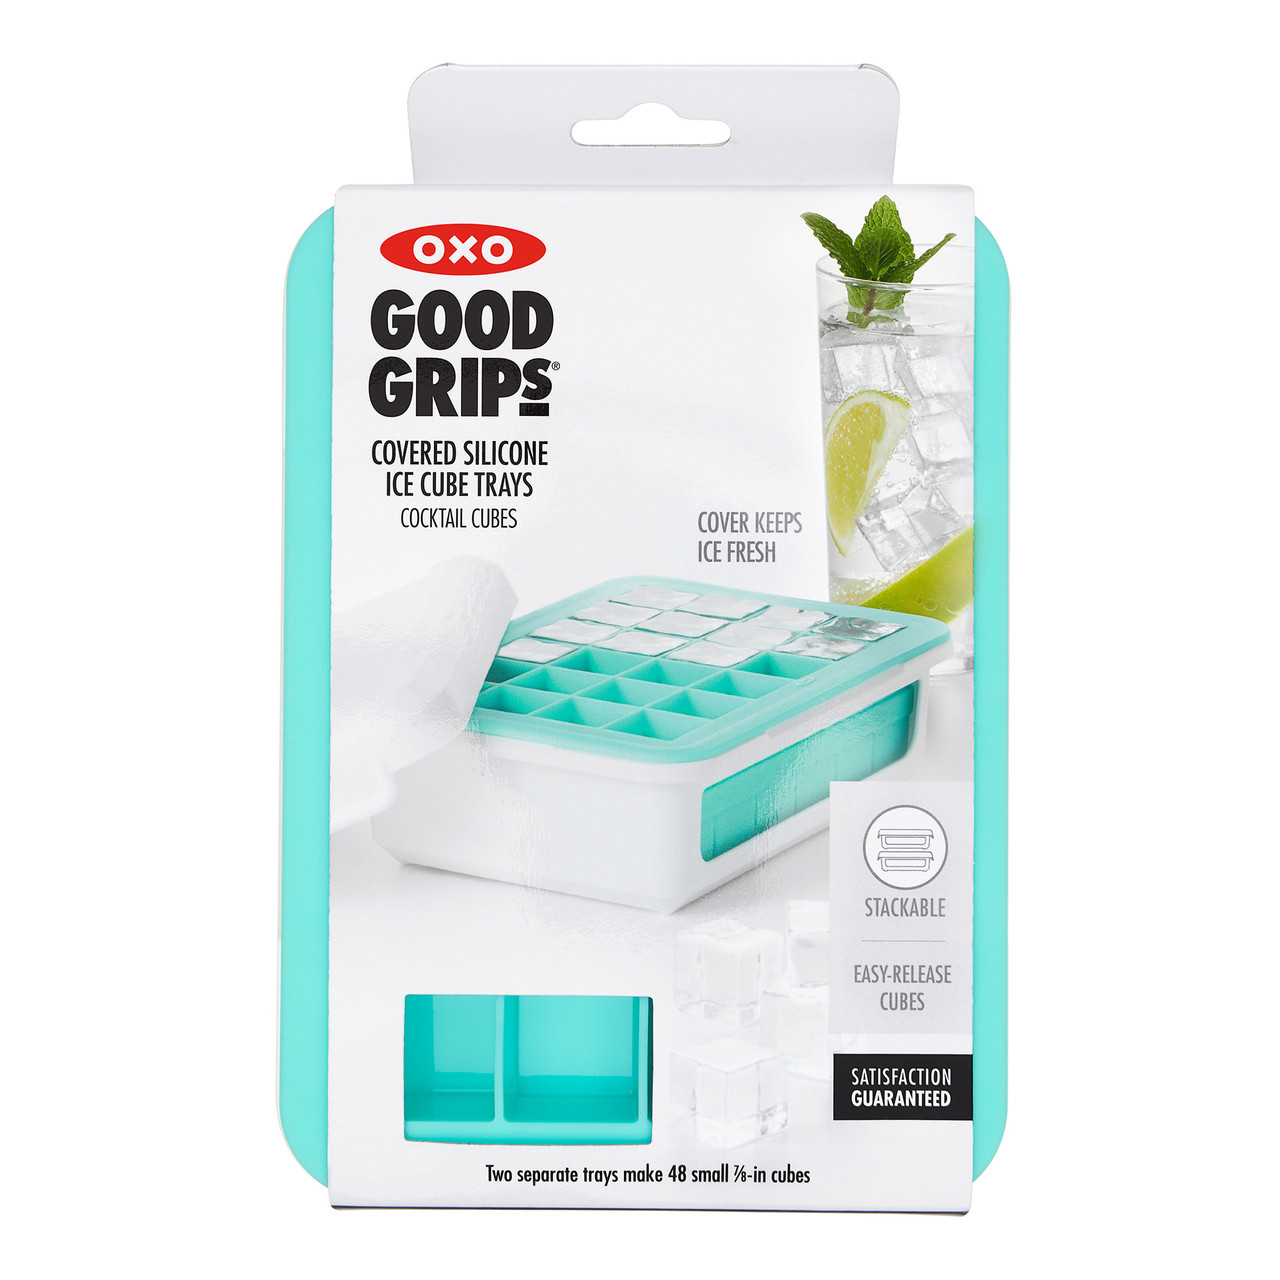 OXO - Covered Silicone Ice Cube Tray, Cocktail Cubes